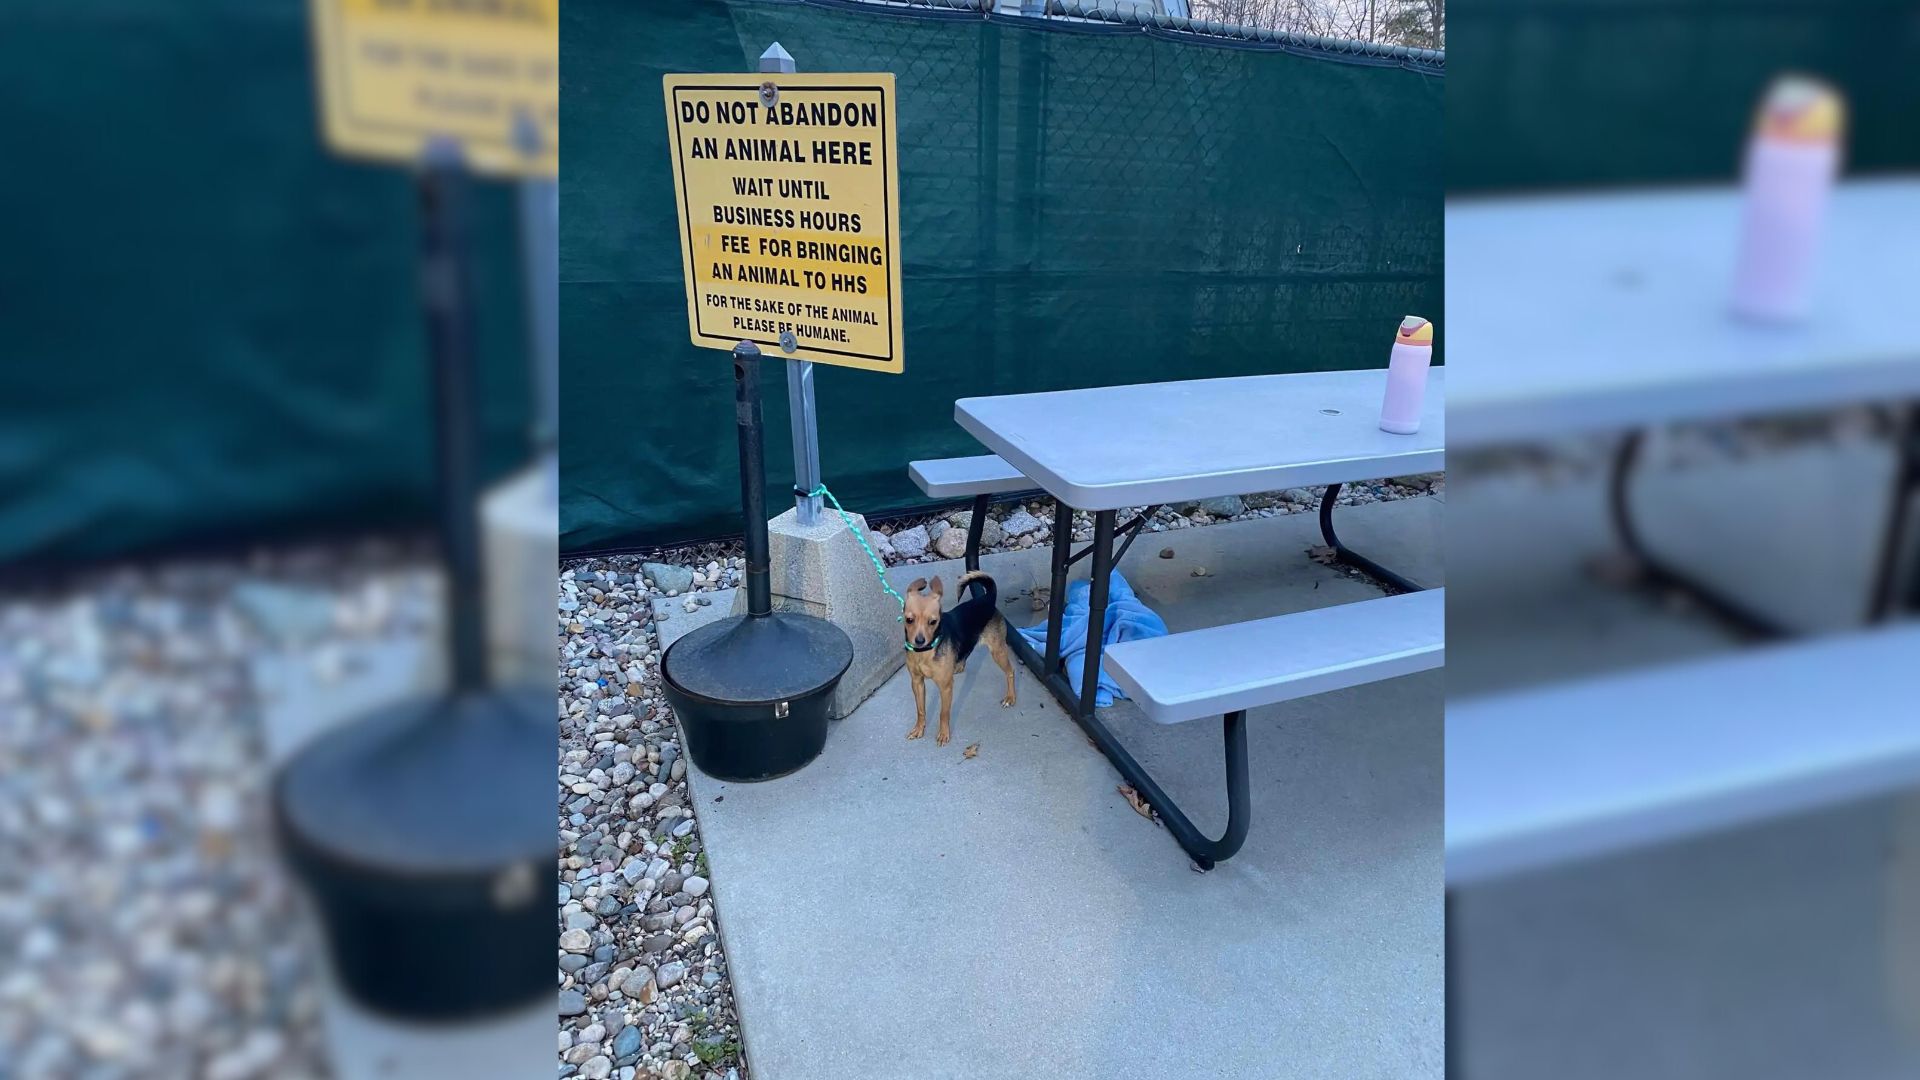 Hooman Left Heartbroken When They Discover A Tiny Animal Tied To Shelter’s ‘Do Not Abandon Animals’ Sign